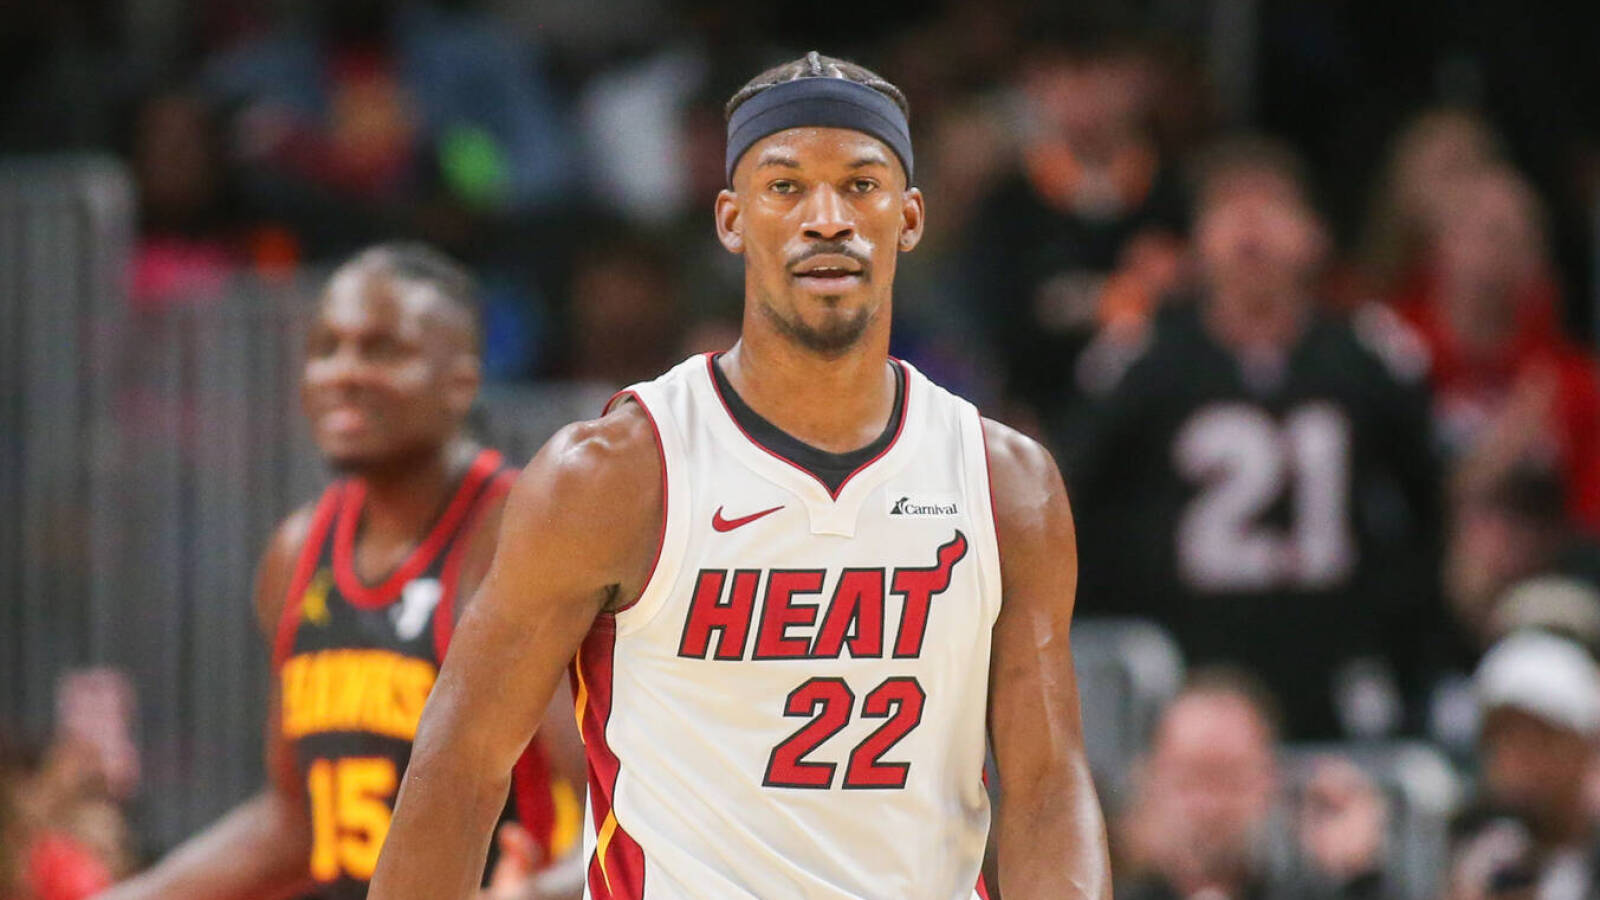 Heat star Jimmy Butler sent pointed message before Game 3